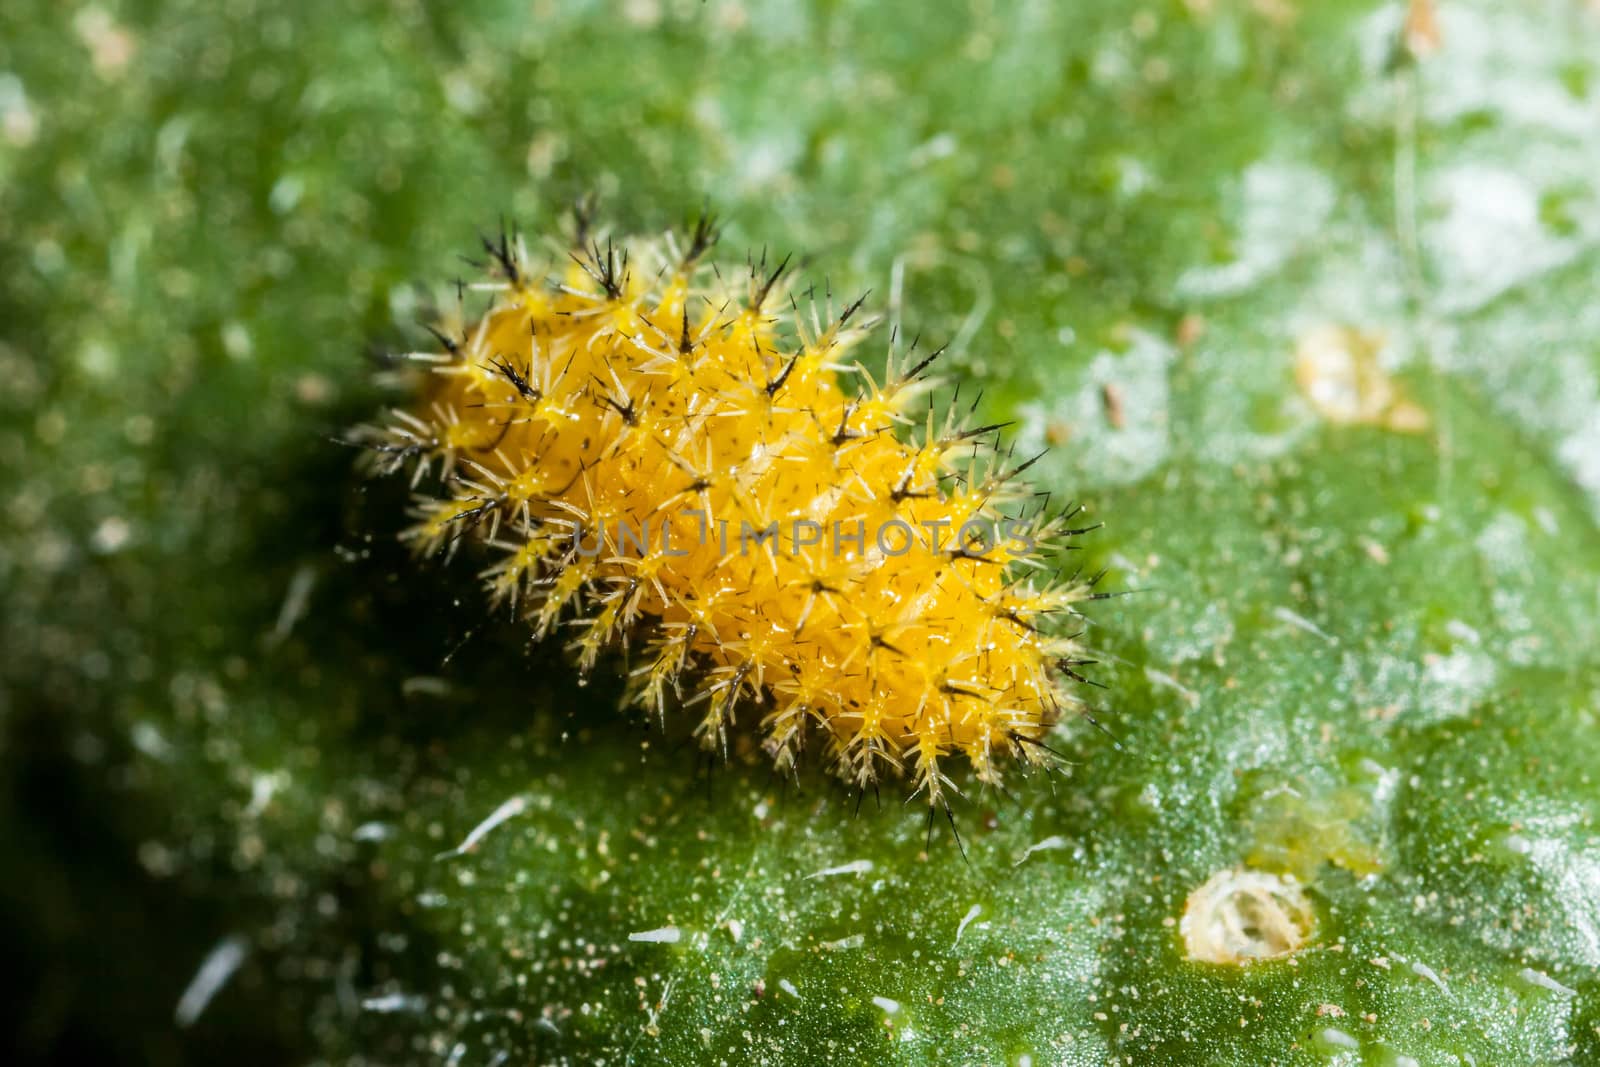 A Silkworm Moth Caterpillar shows off its toxic spines, while resting on the leaf of a Squirting Cucumber plant.